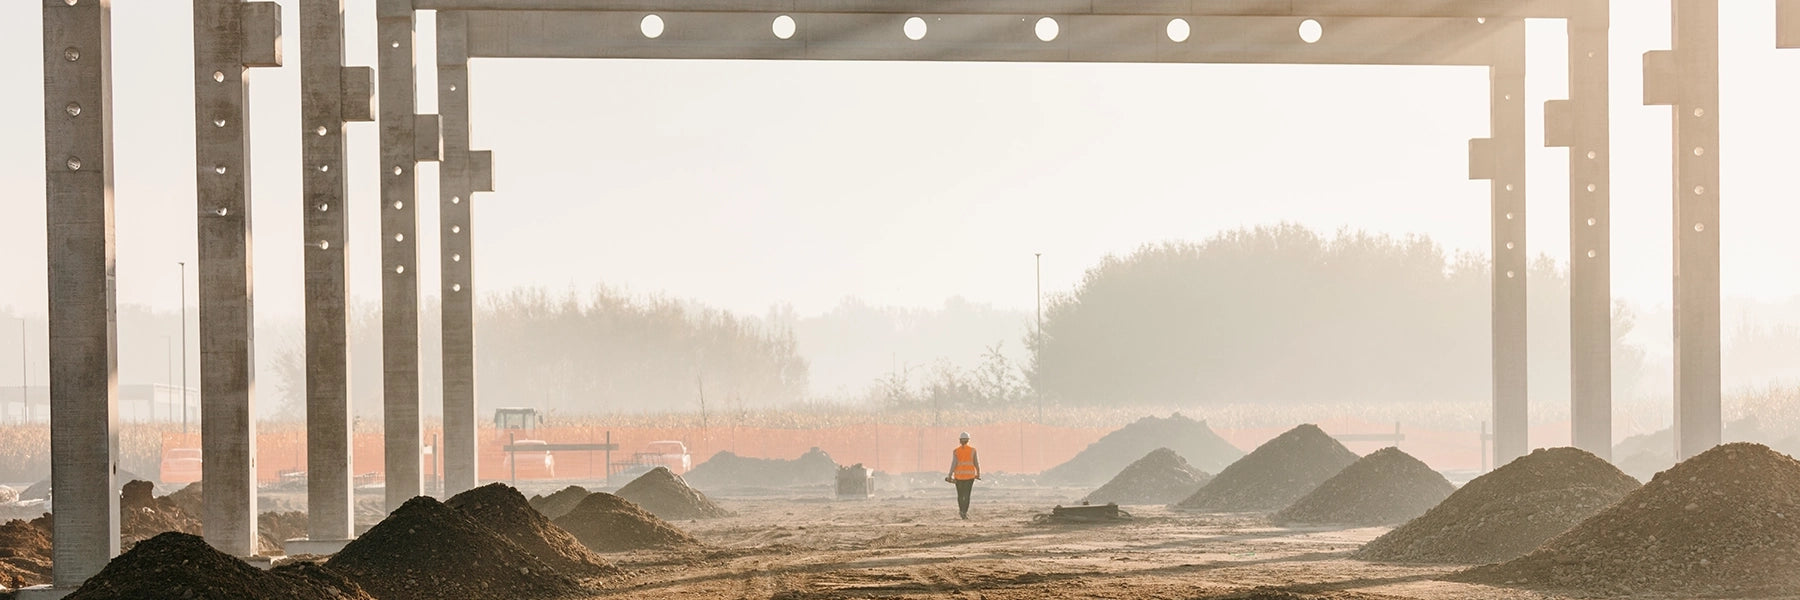 A man walks through a construction site with piles of construction materials.